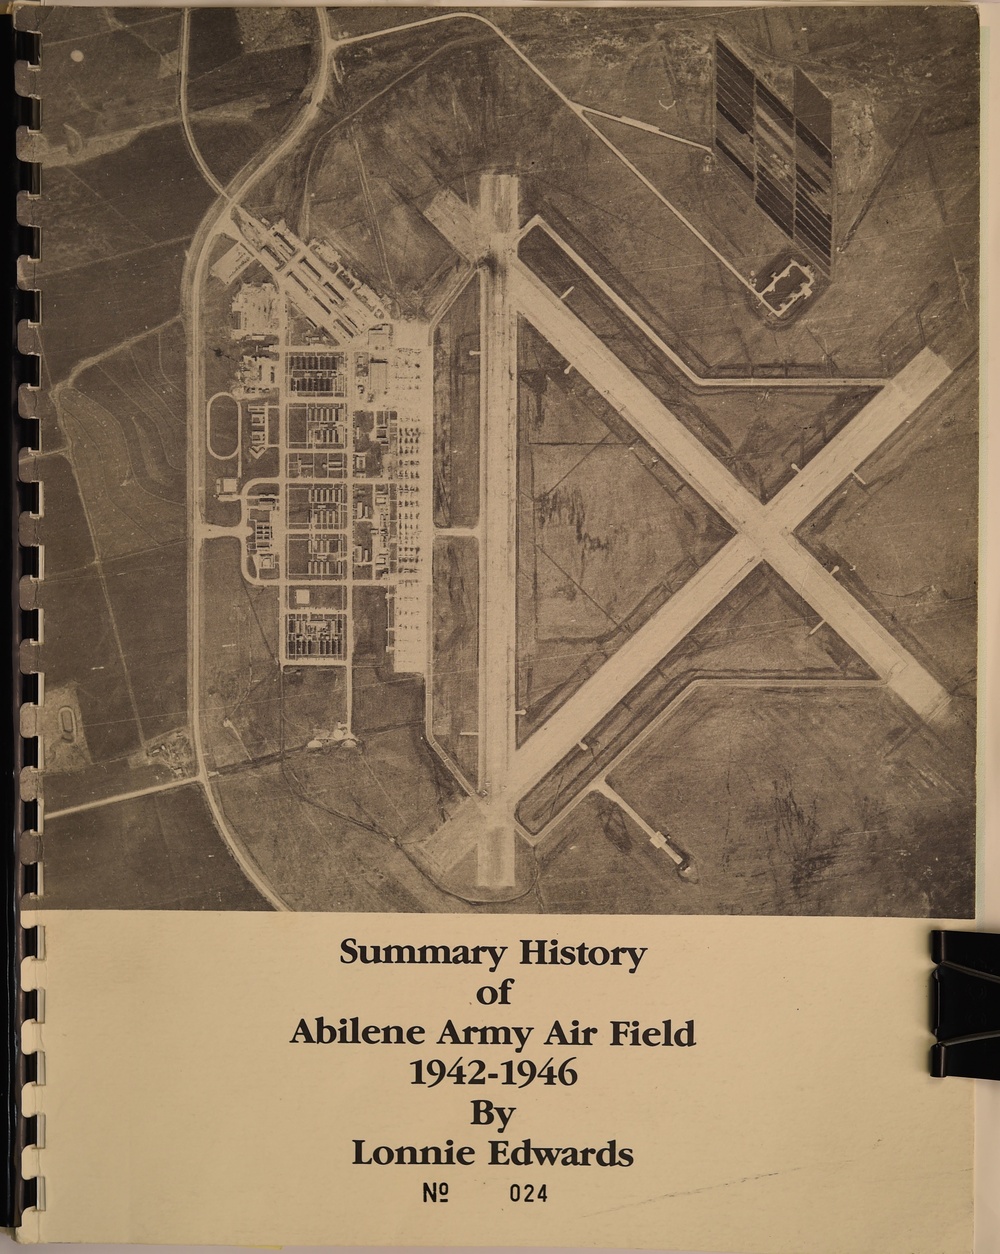 Dyess Air Force Base Historical Photo